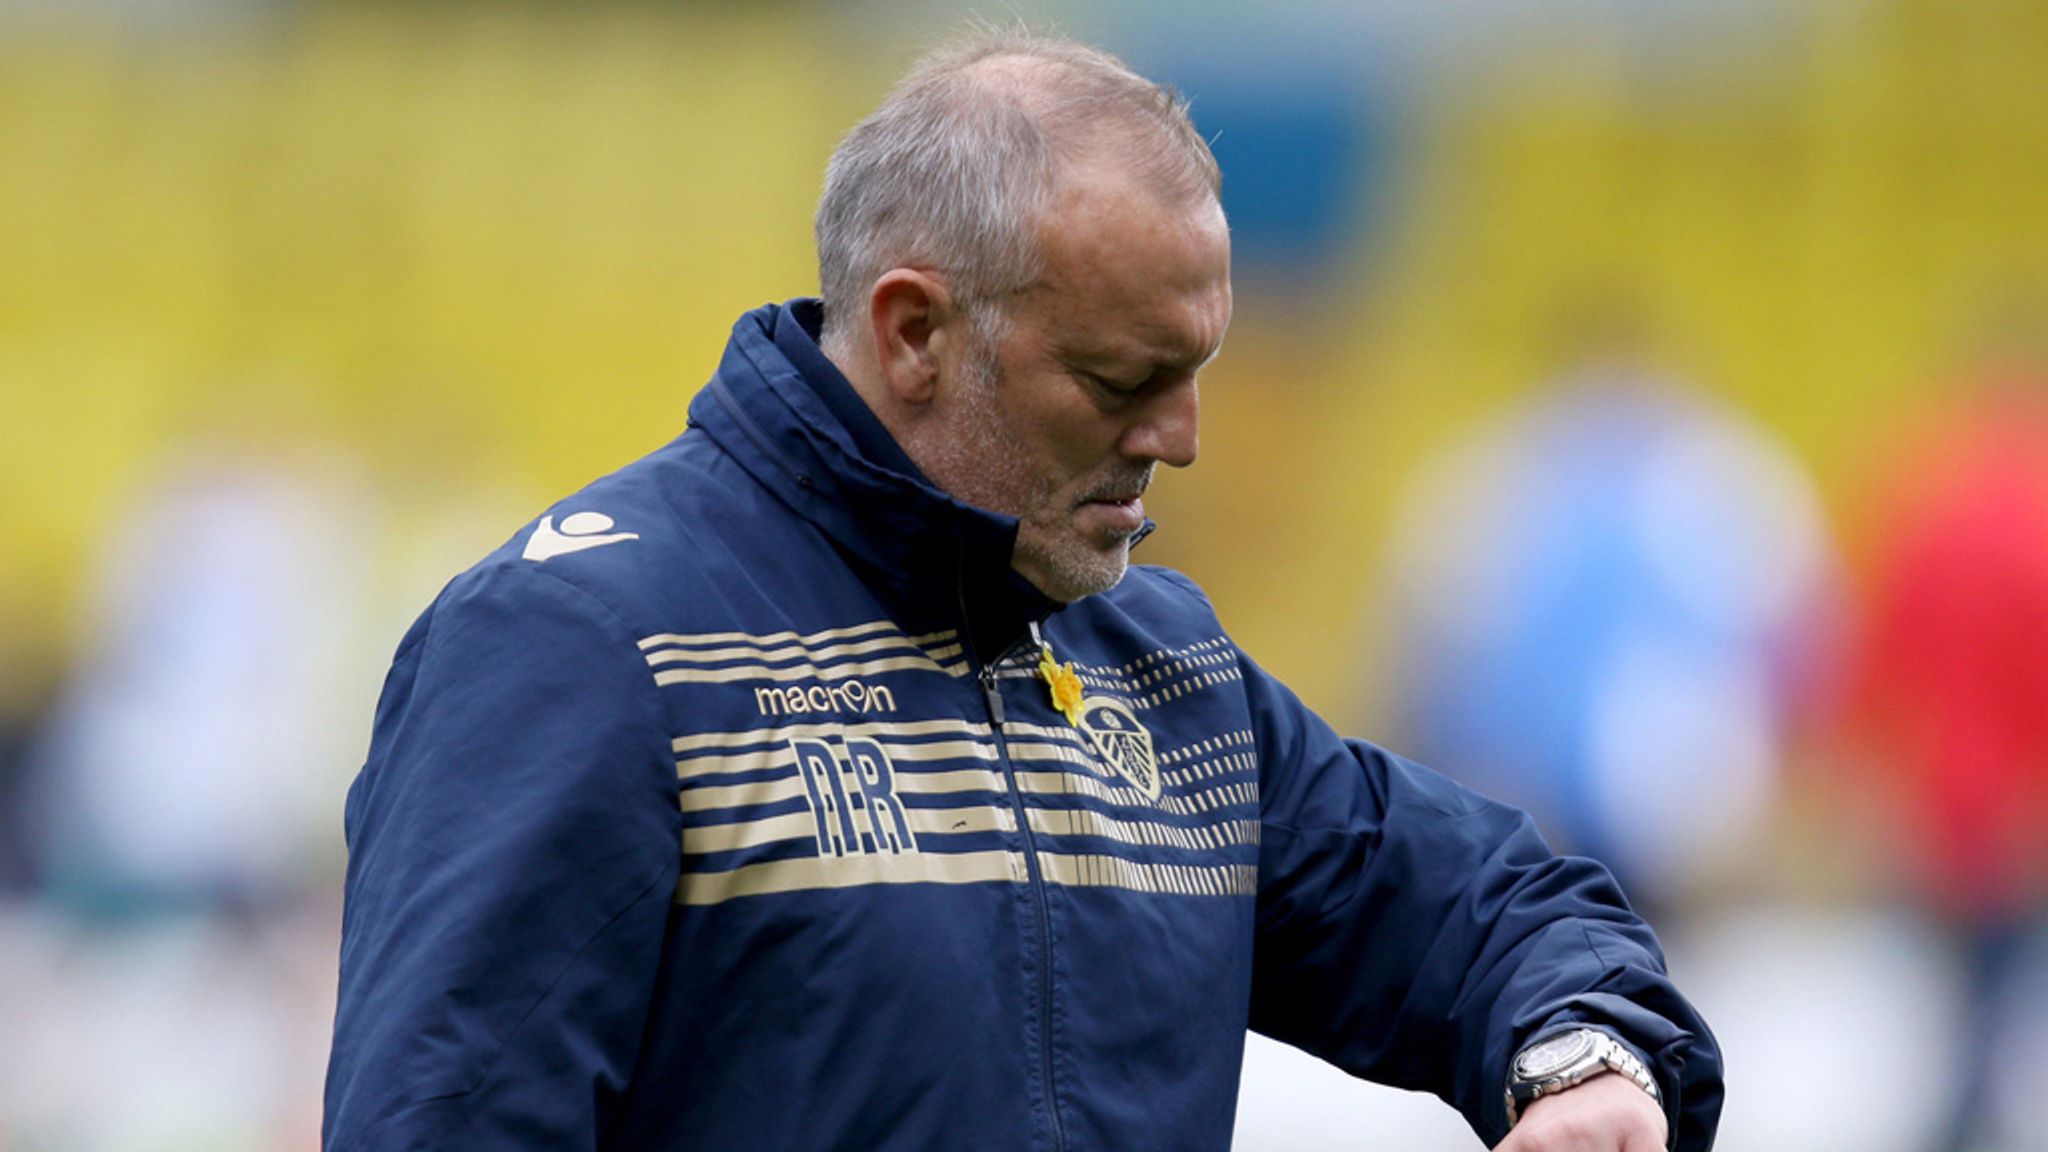 Former Leeds United manager Neil Redfearn has left the club | Football News | Sky Sports